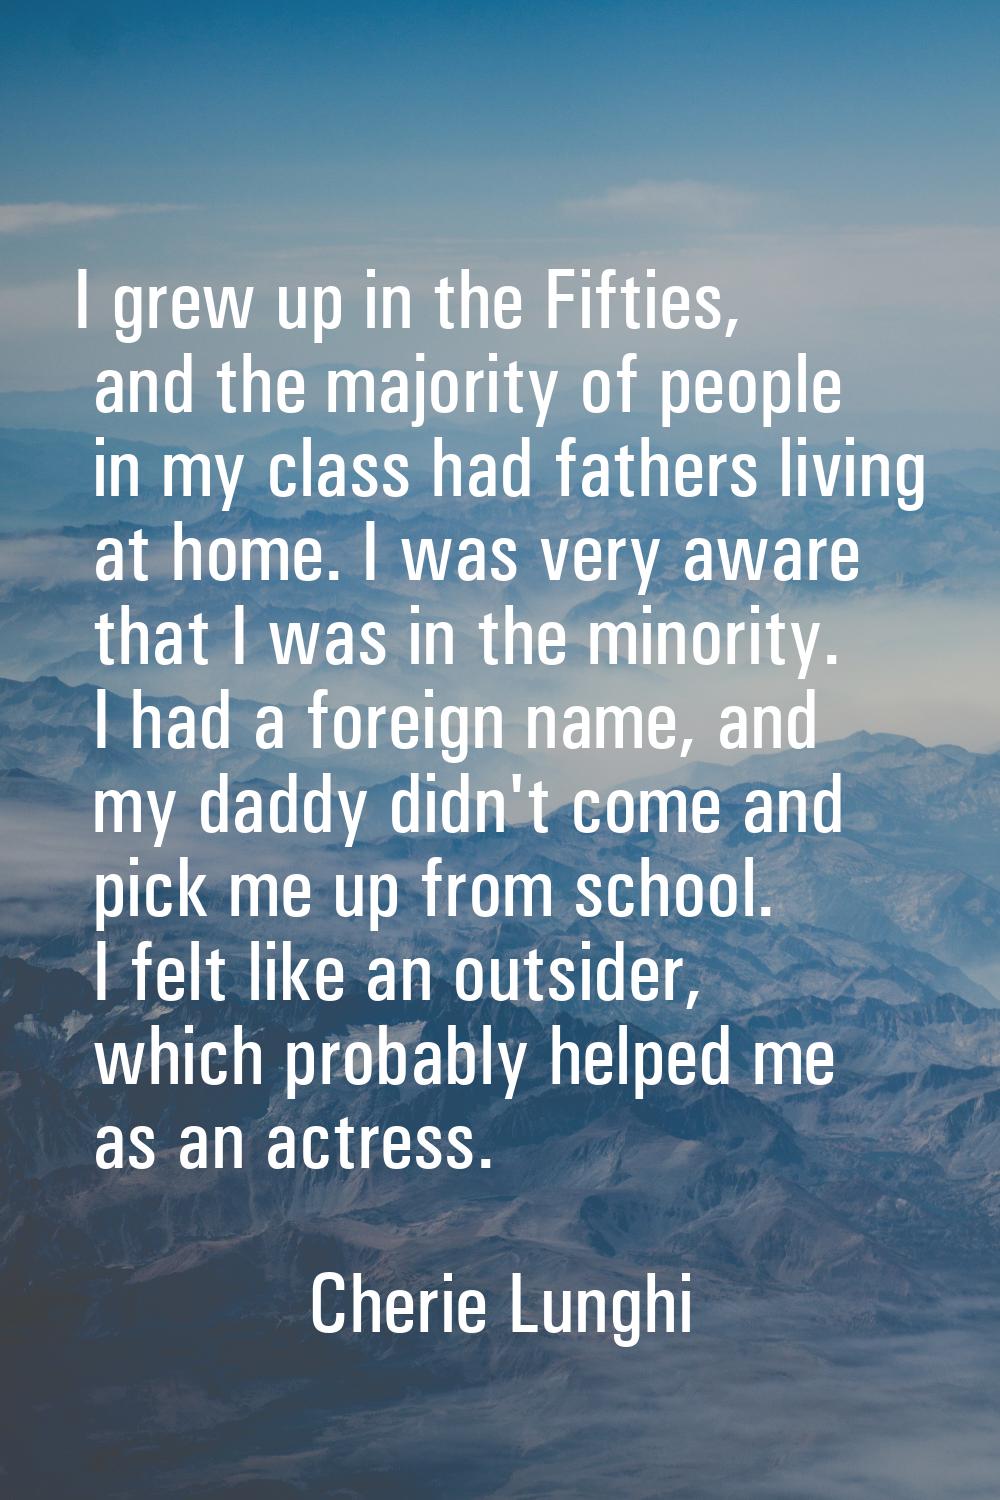 I grew up in the Fifties, and the majority of people in my class had fathers living at home. I was 